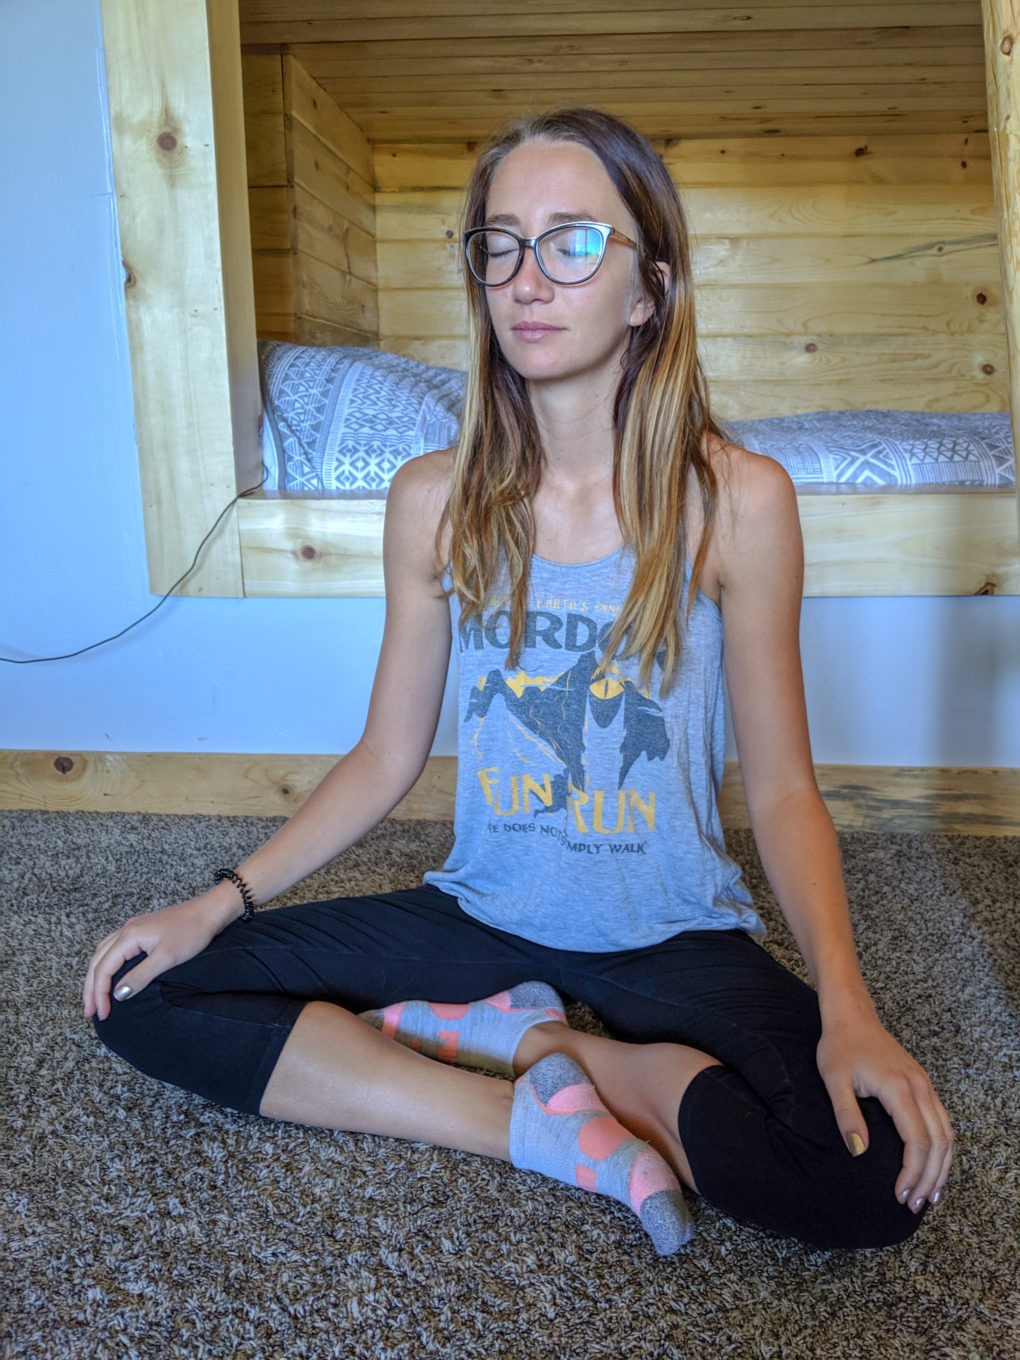 Yoga and meditation. Activities for a DIY women's wellness retreat on a budget.